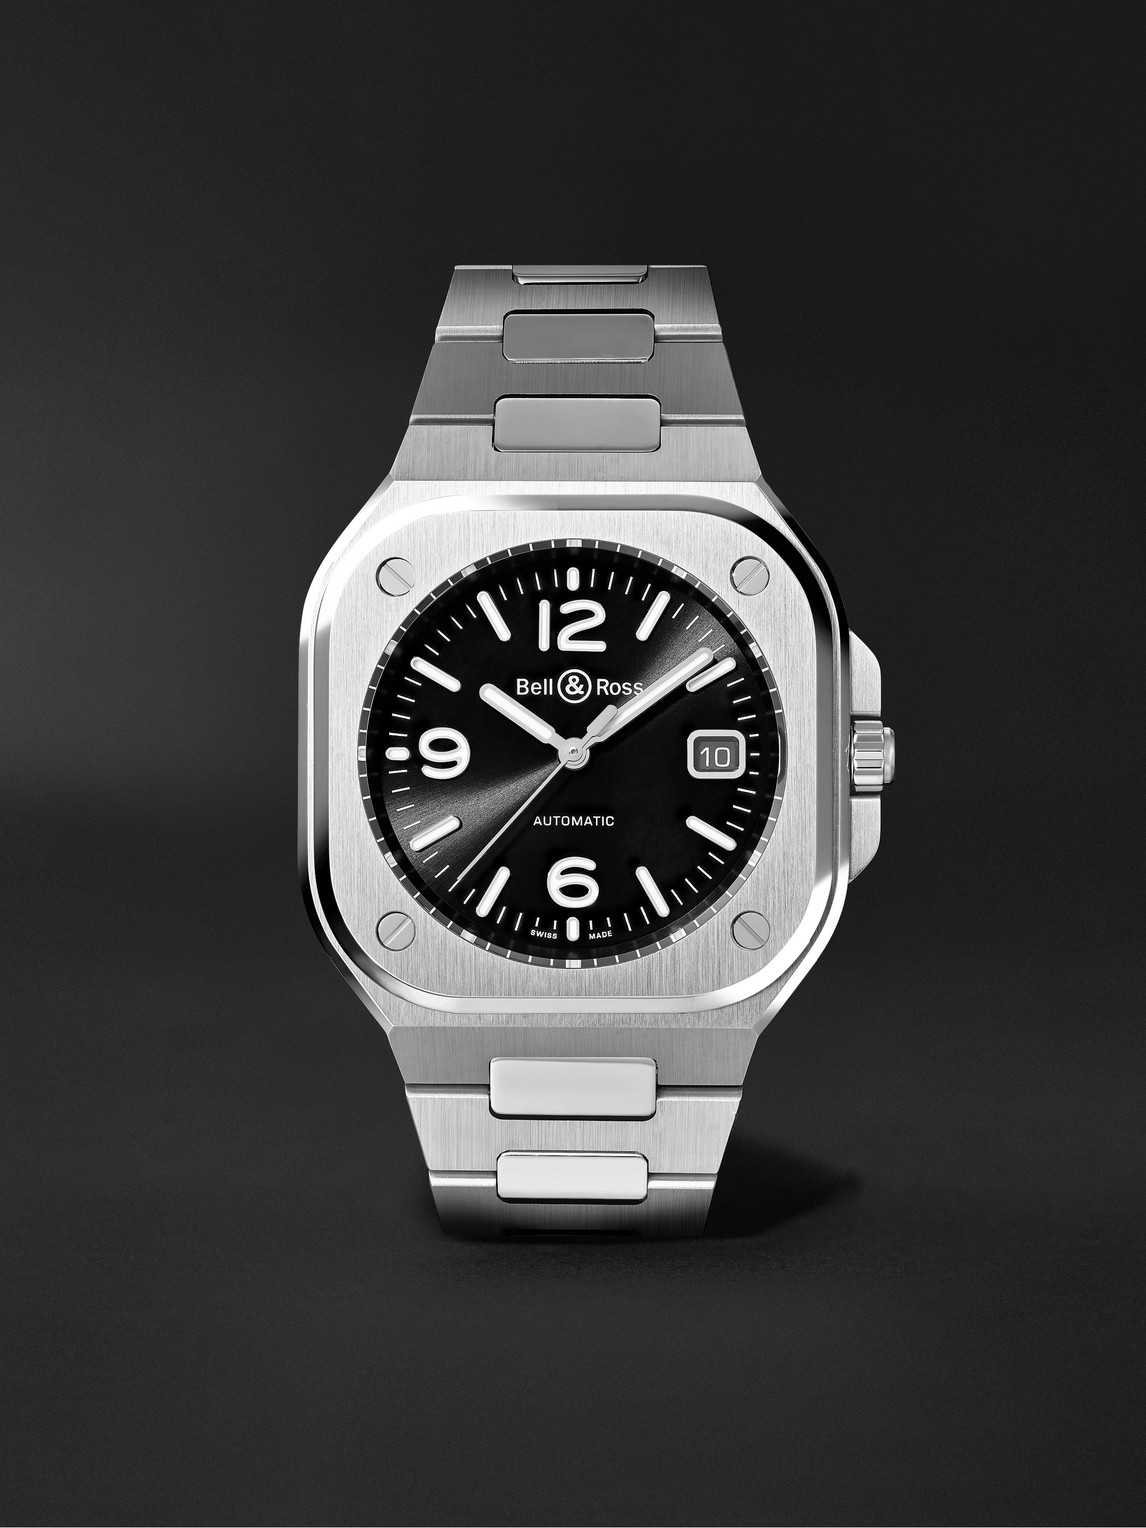 Bell & Ross Br 05 Black Steel Automatic 40mm Stainless Steel Watch, Ref. No. Br05a-bl-st/sst